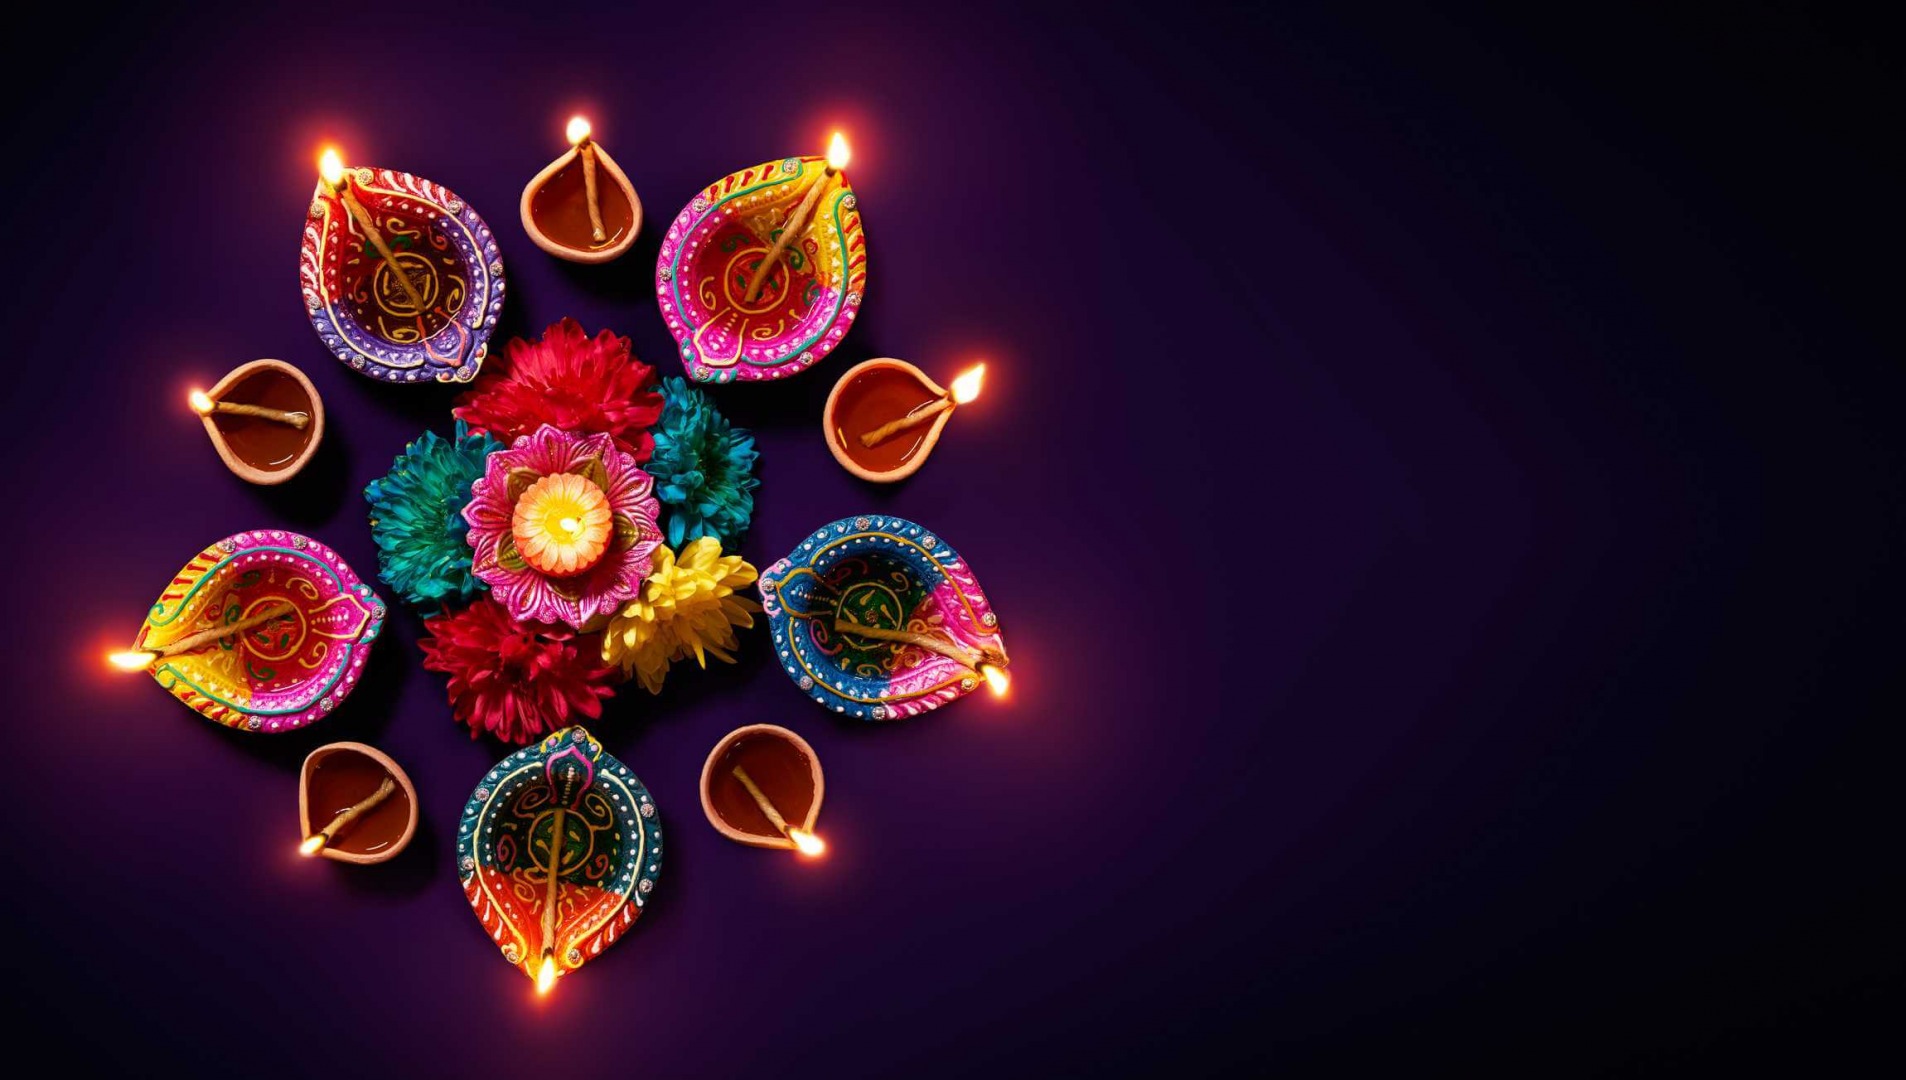 Happy Diwali 2021: People From All Around the World Celebrate The Festival of Lights